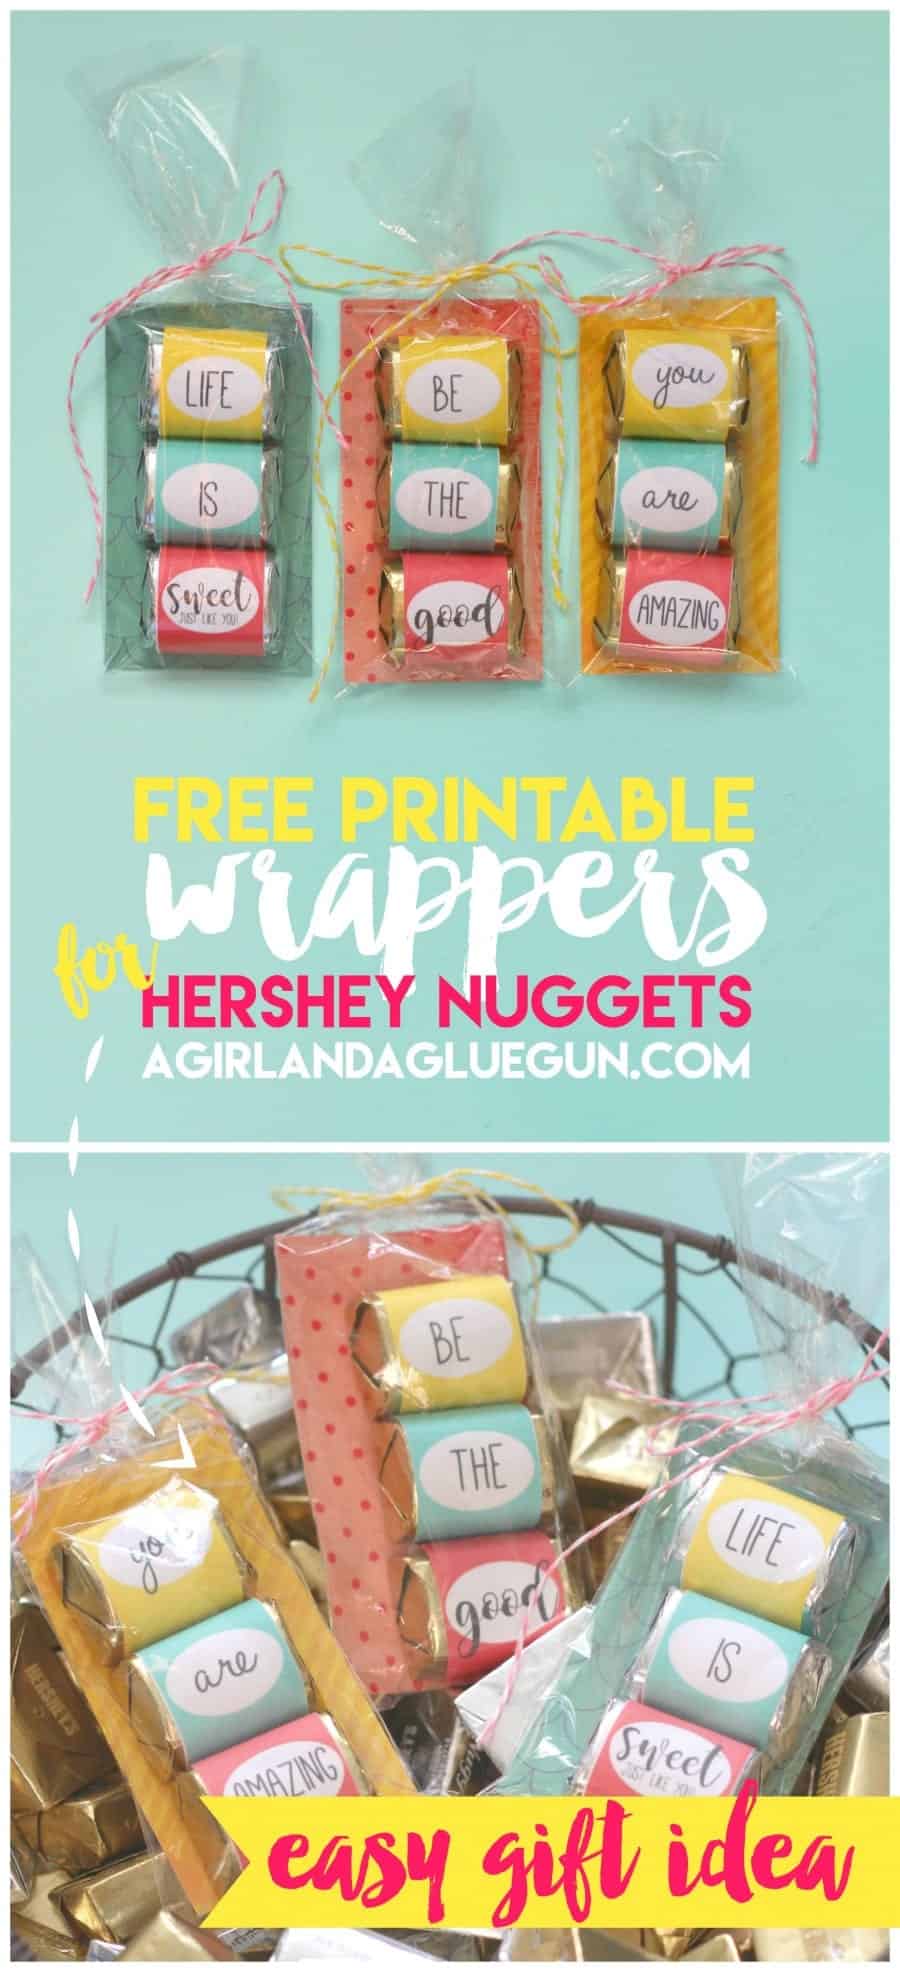 free printables for cute inspirational wrappers for Hershey nuggets--easy and cheap diy gift